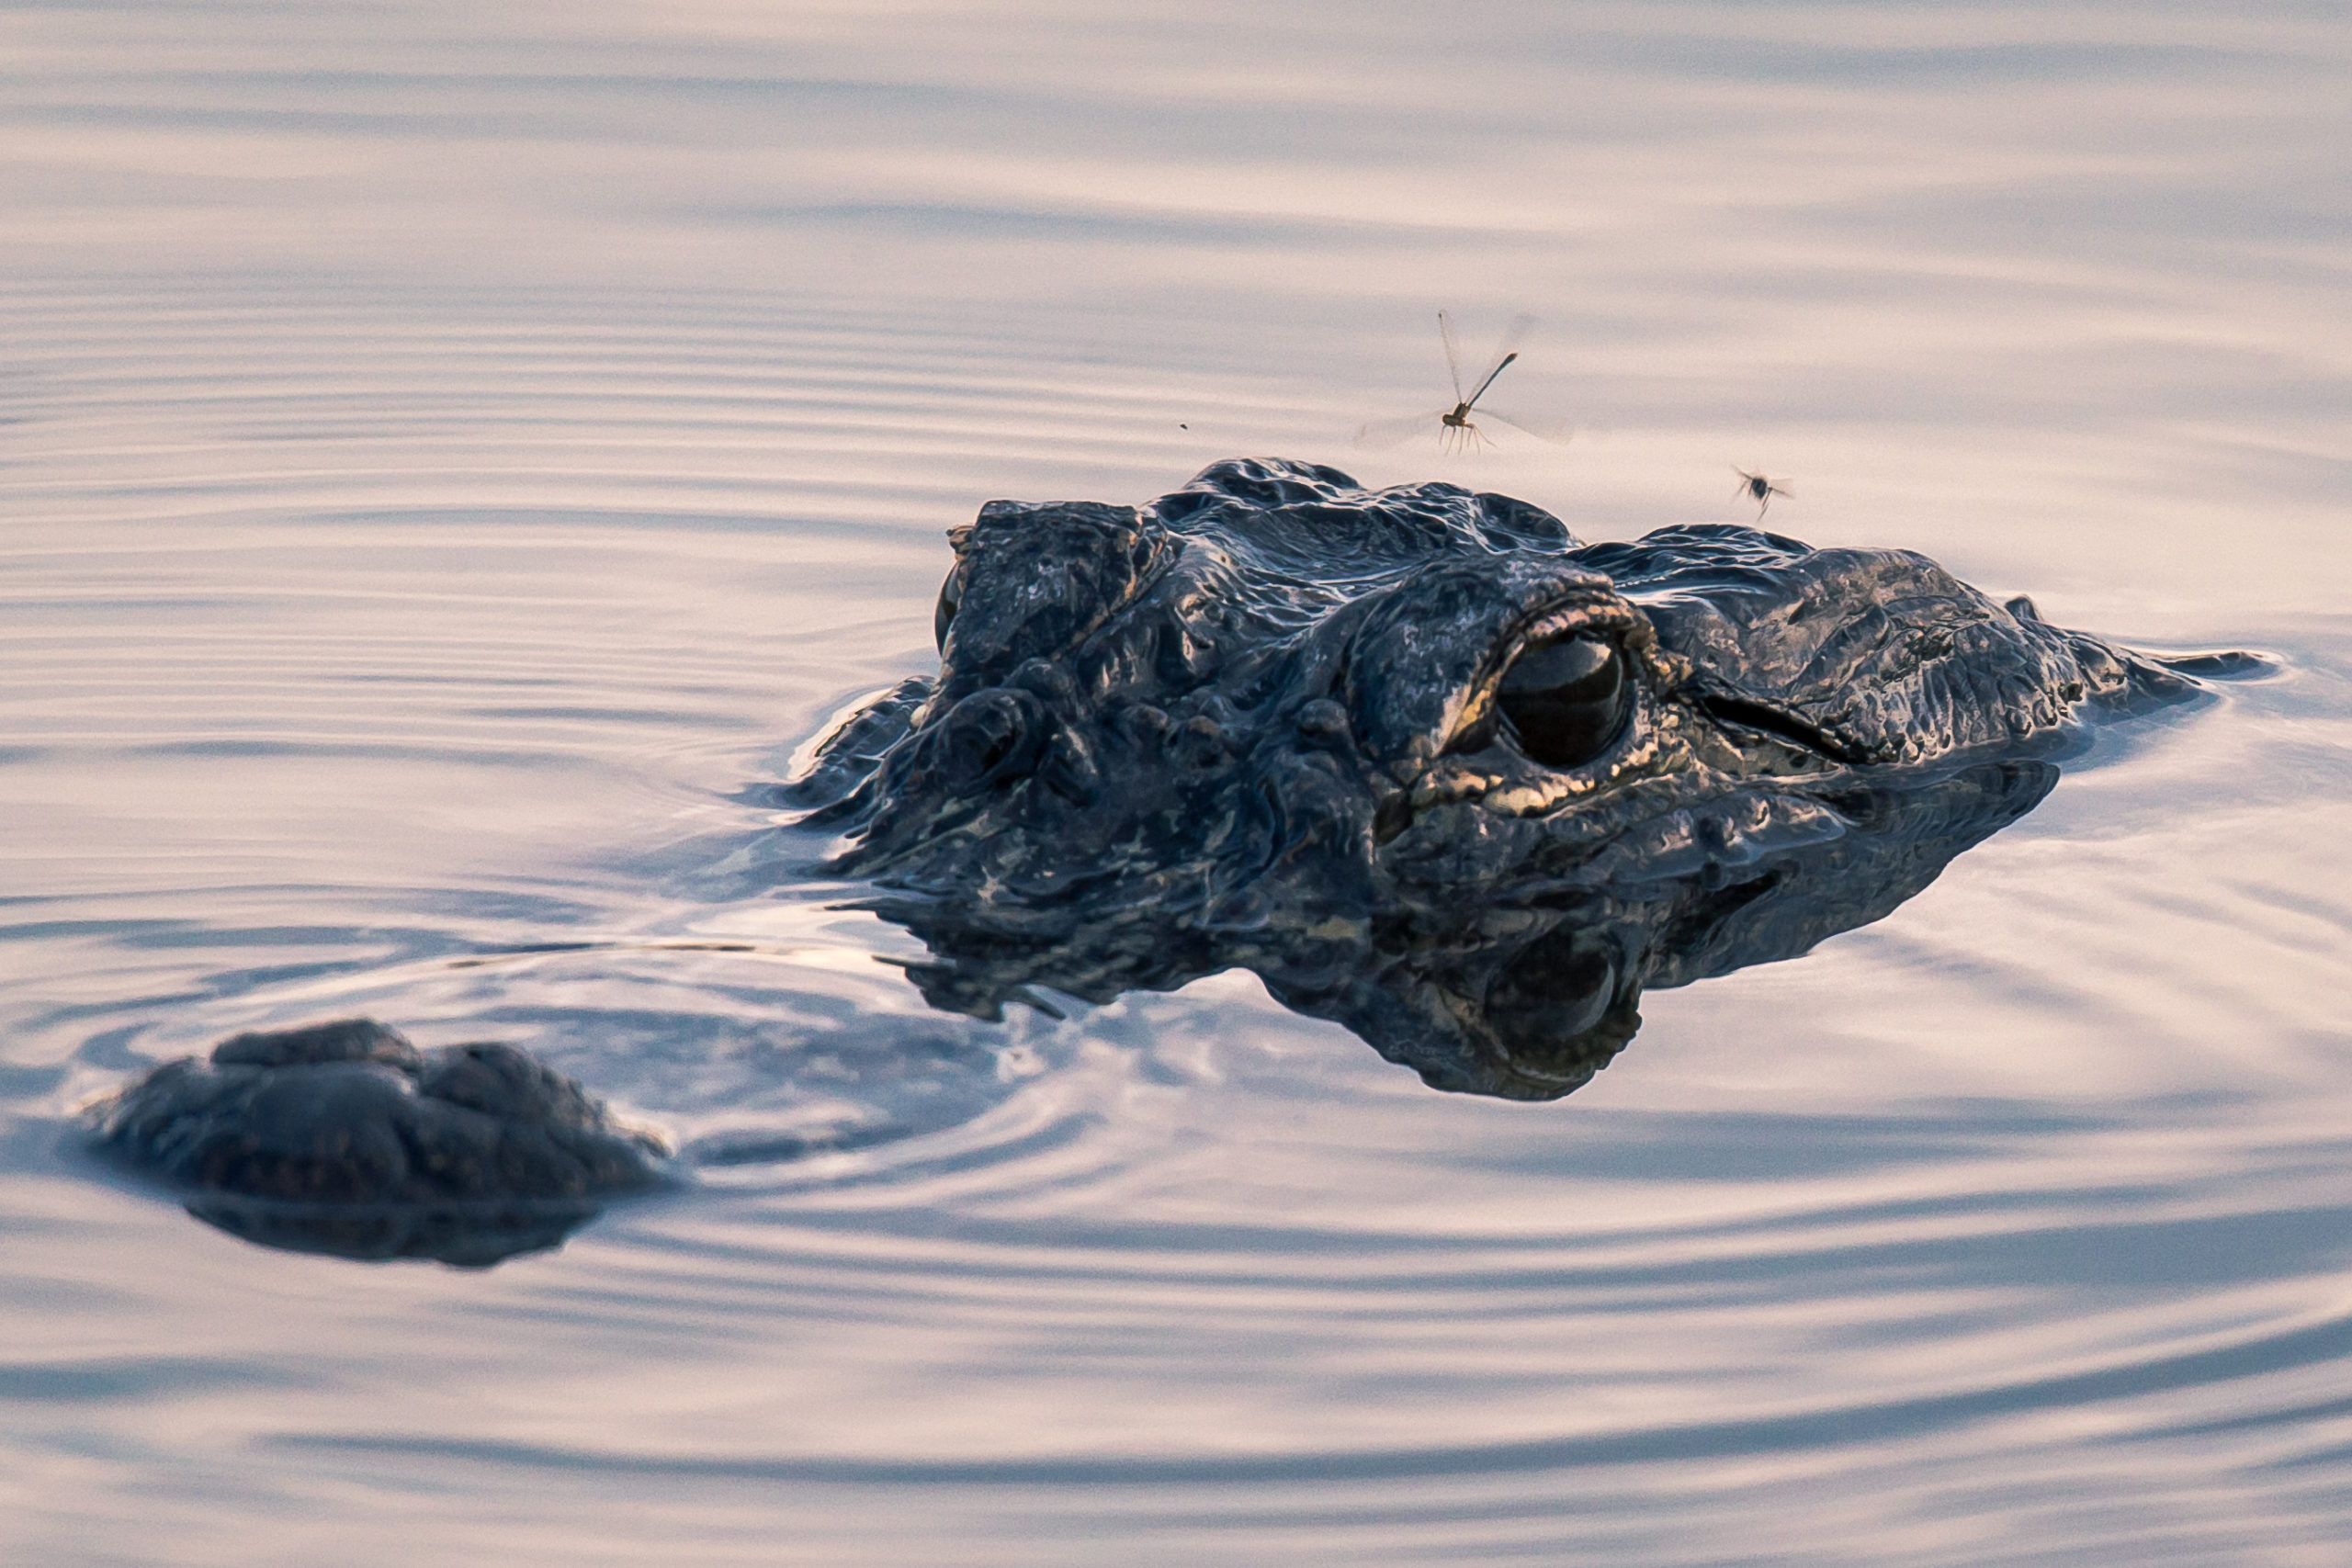 An alligator pokes its head out of the water in the Barataria.